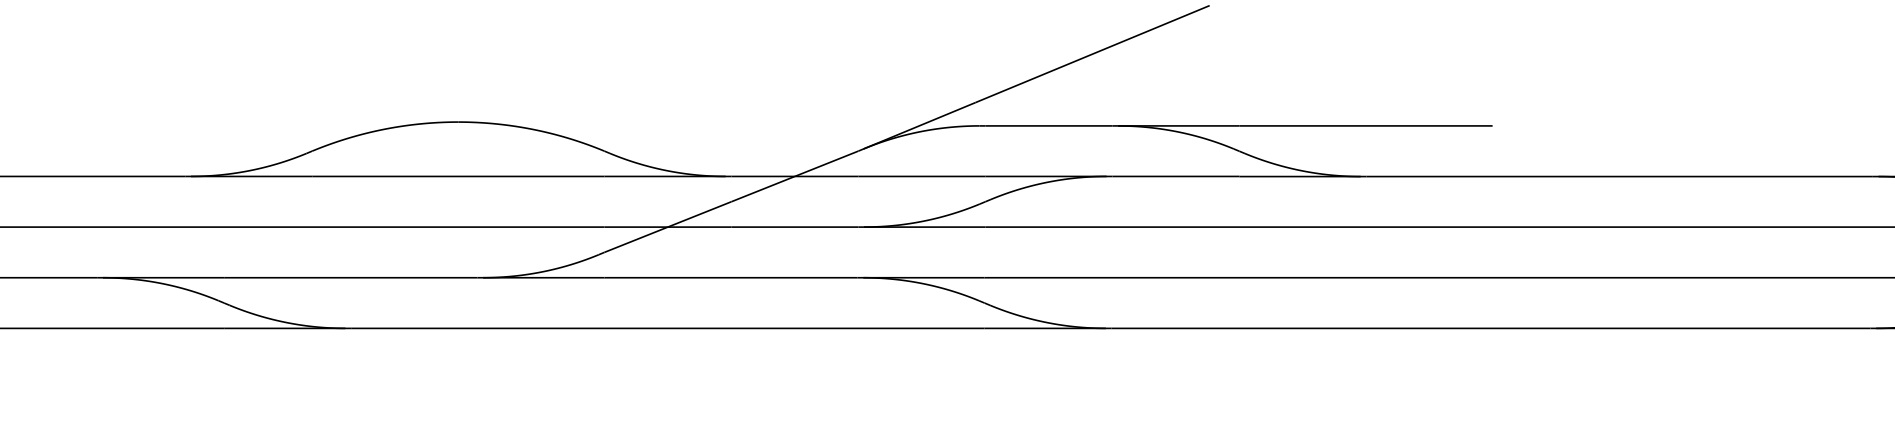 Simplified - Centreline - Southern end of Station.jpg